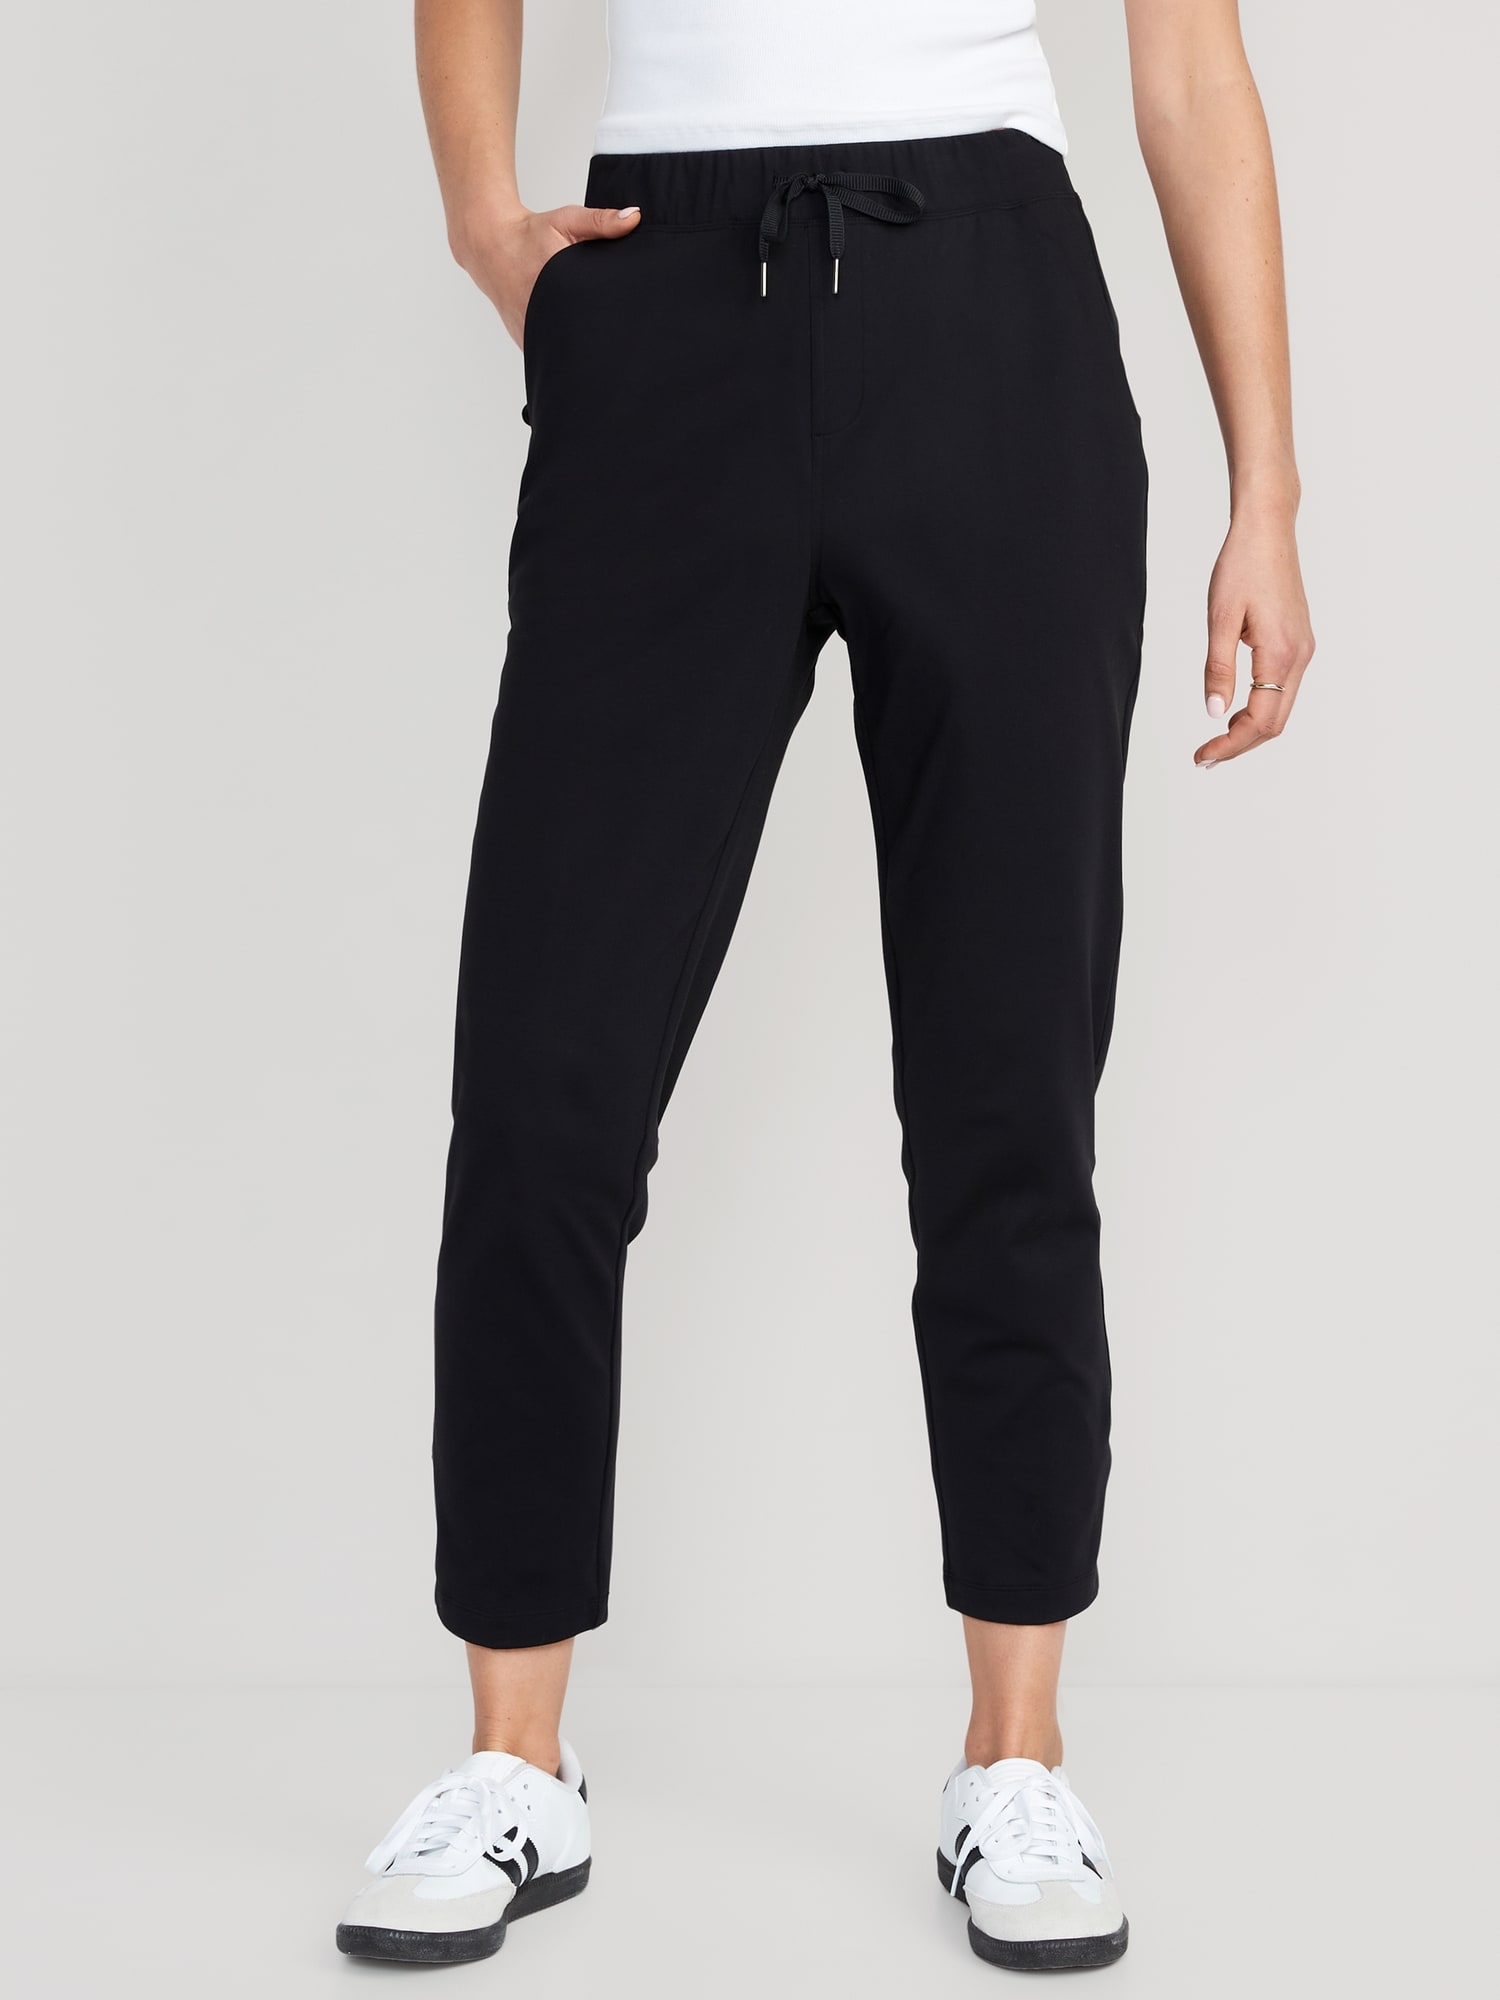 NWT: Old Navy Extra High-Waisted Powersoft Lt. Compression